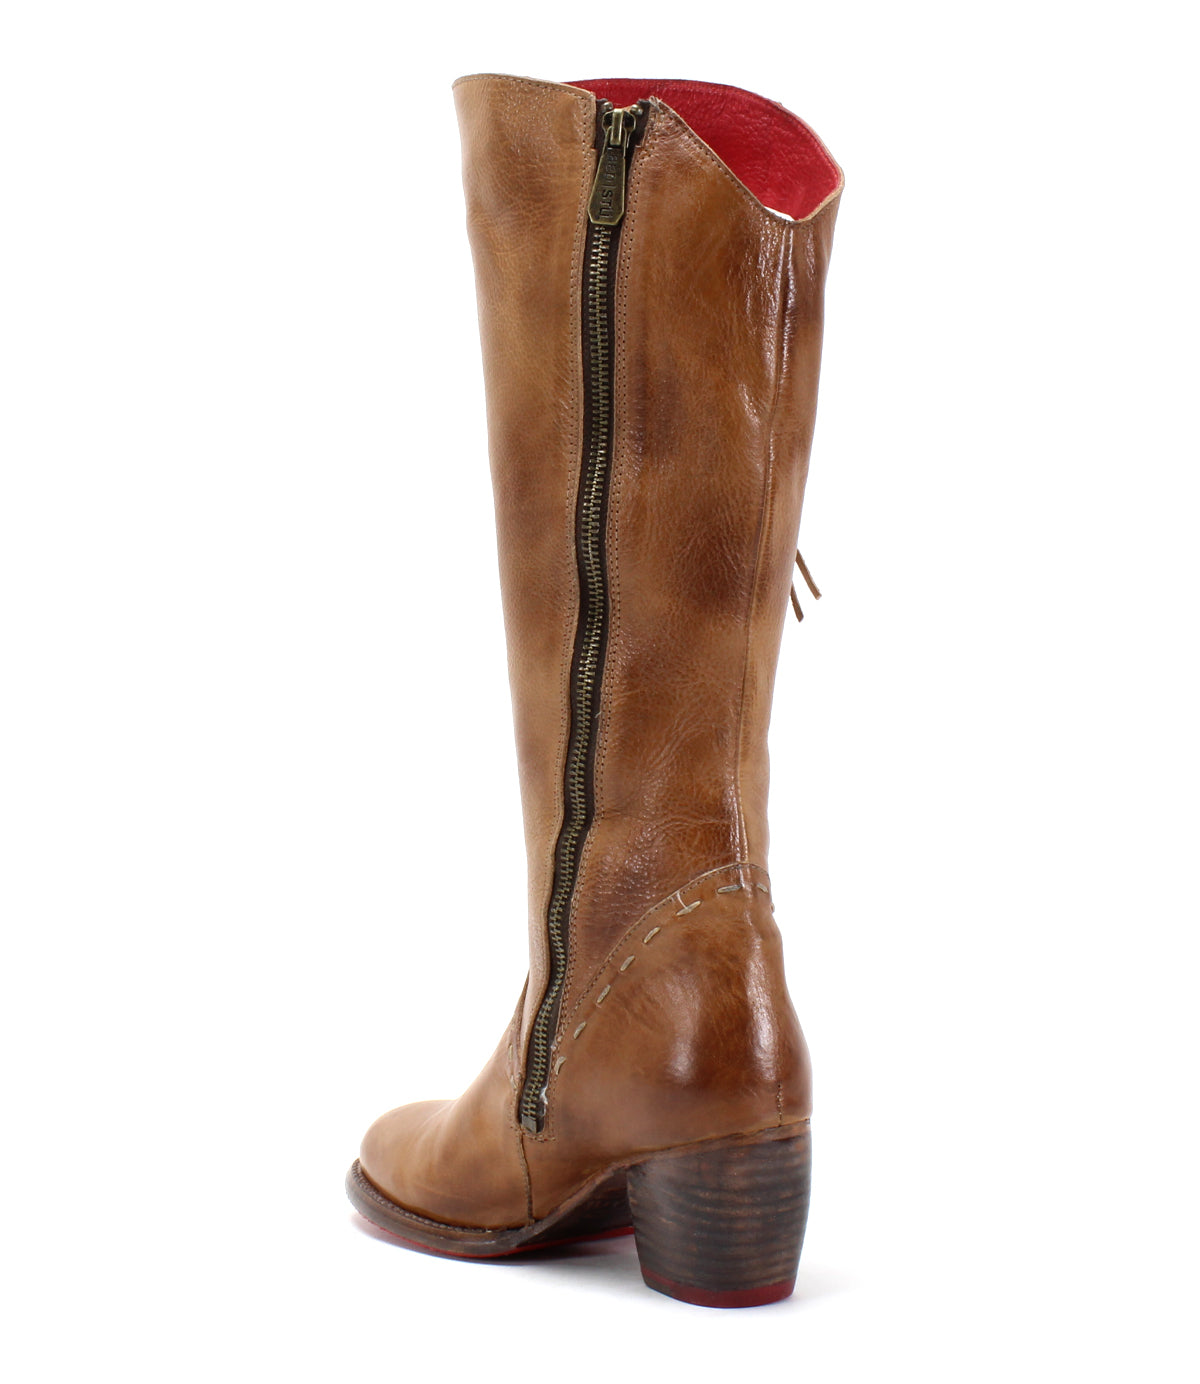 A women's tan Charis tall boot with tassels by Bed Stu.